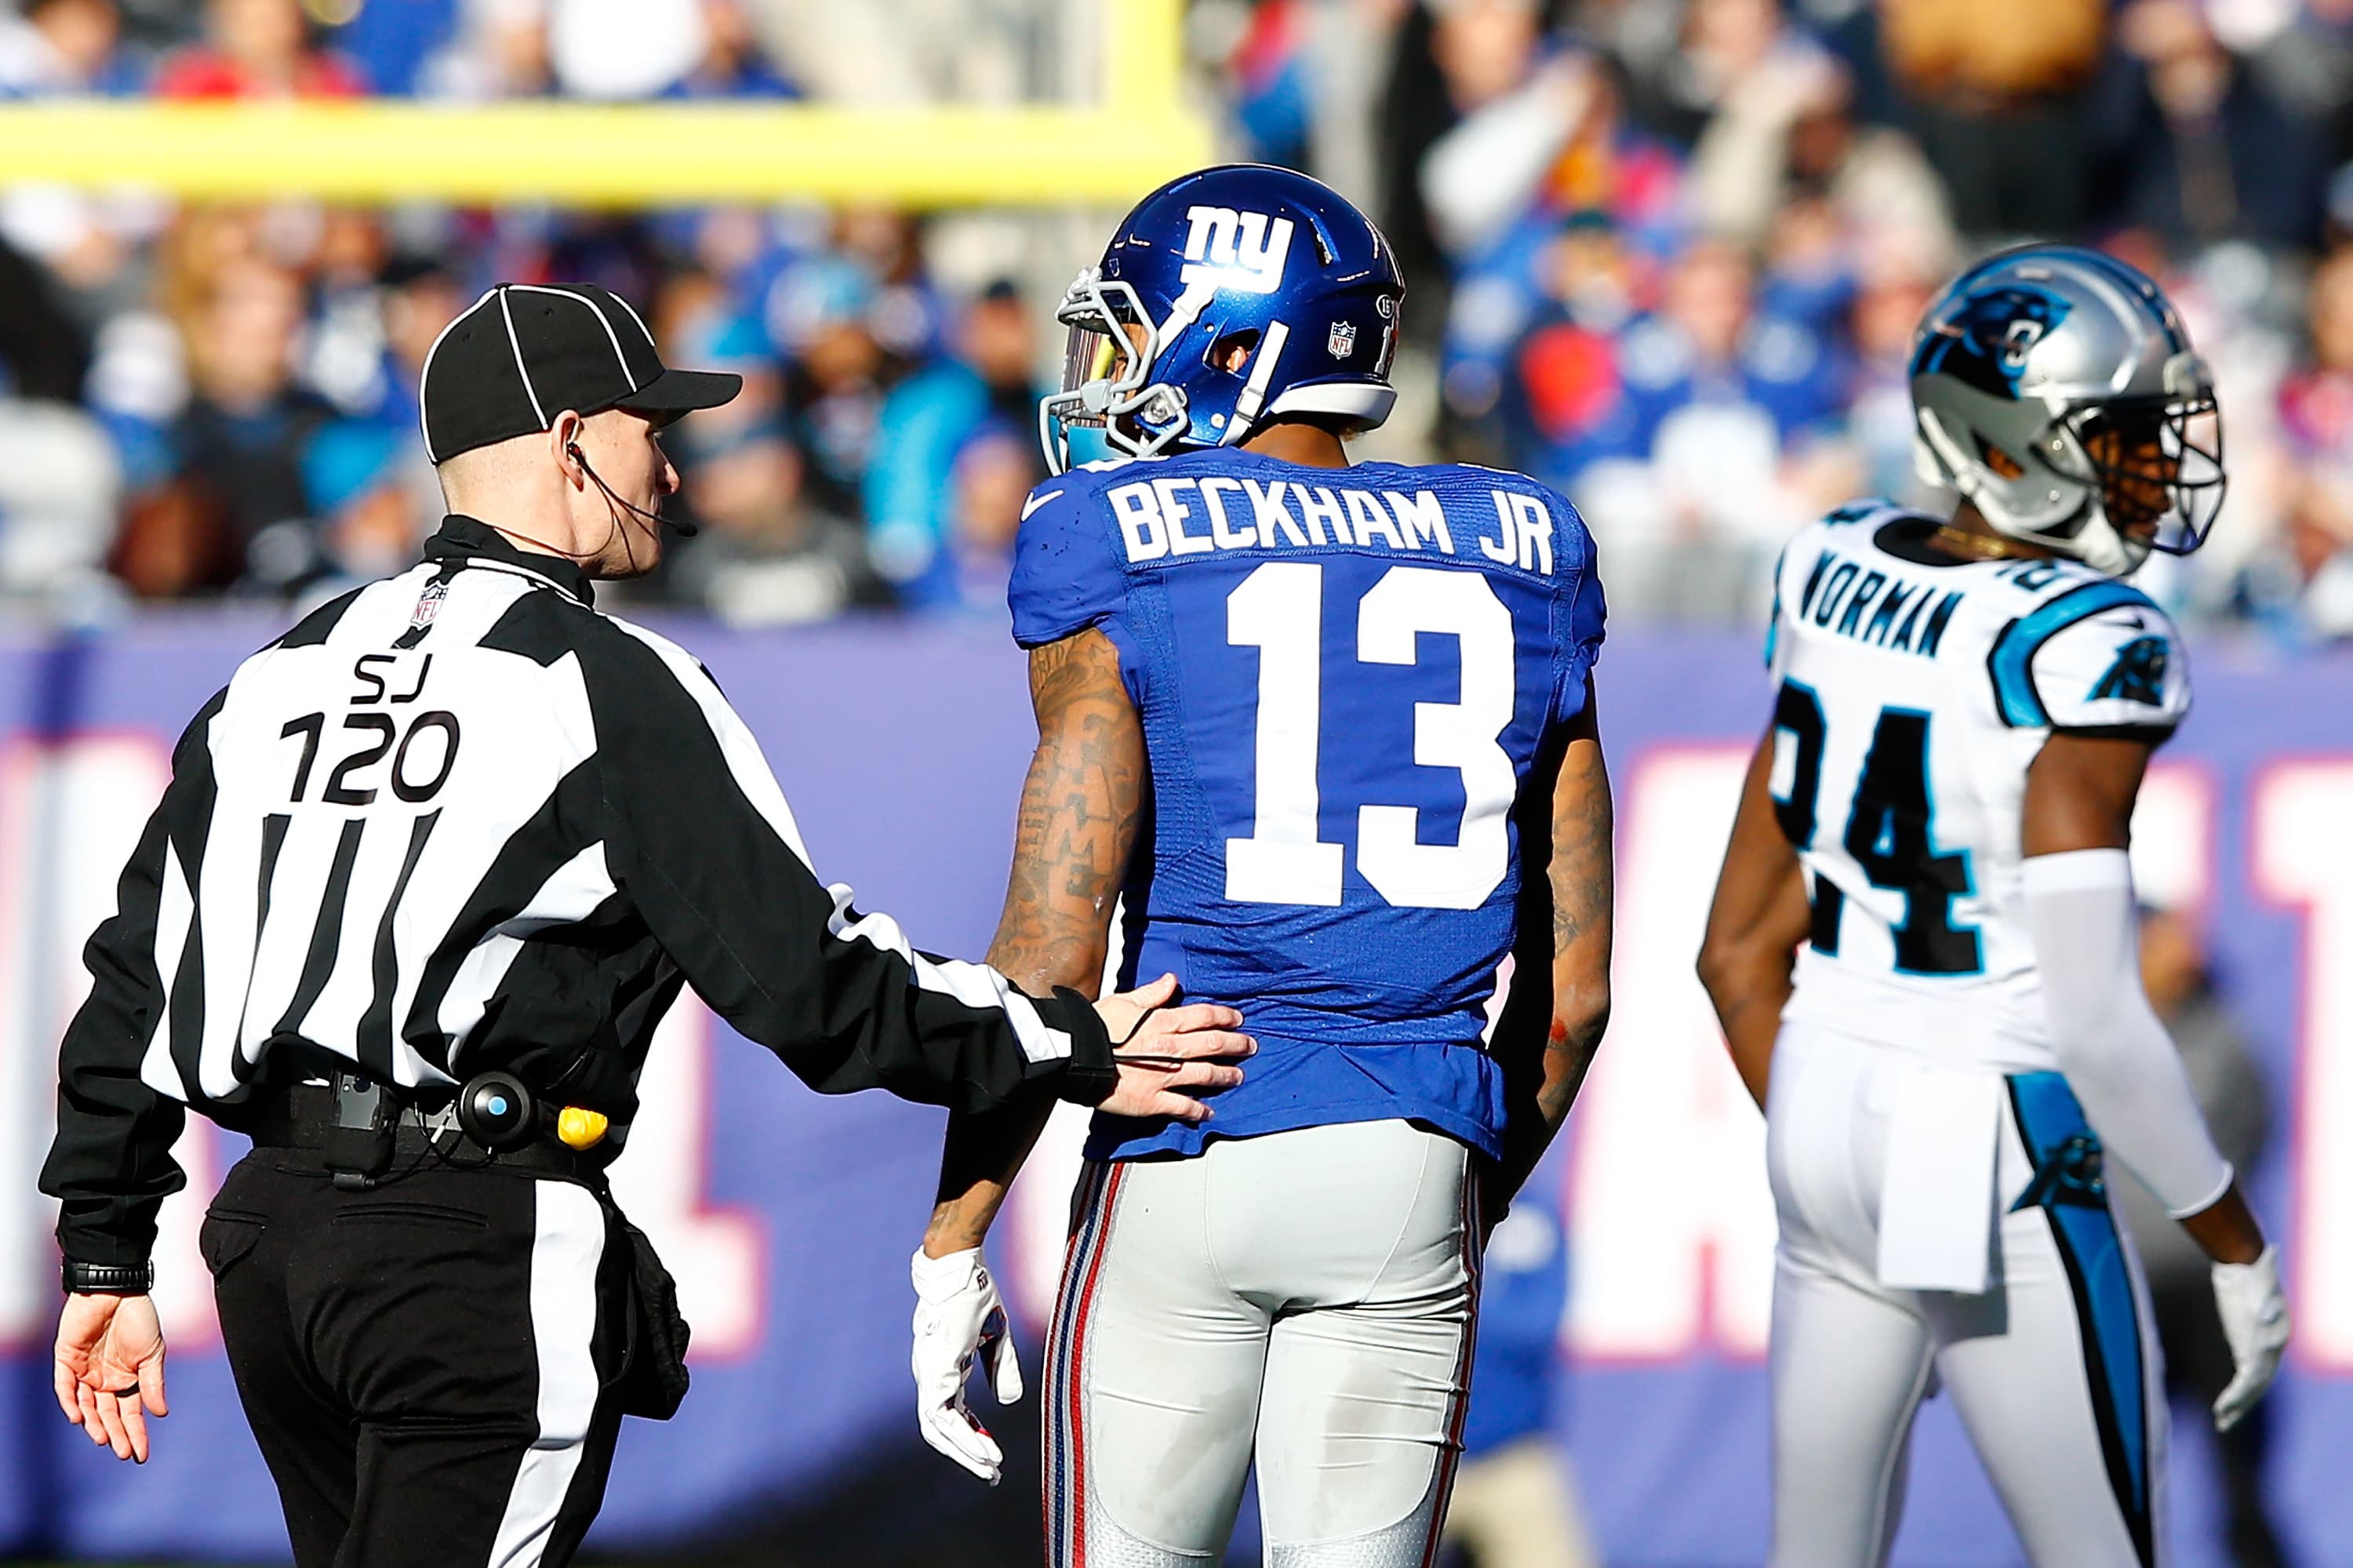 Catch by Giants' Odell Beckham Jr. Made for a Great Picture - The New York  Times